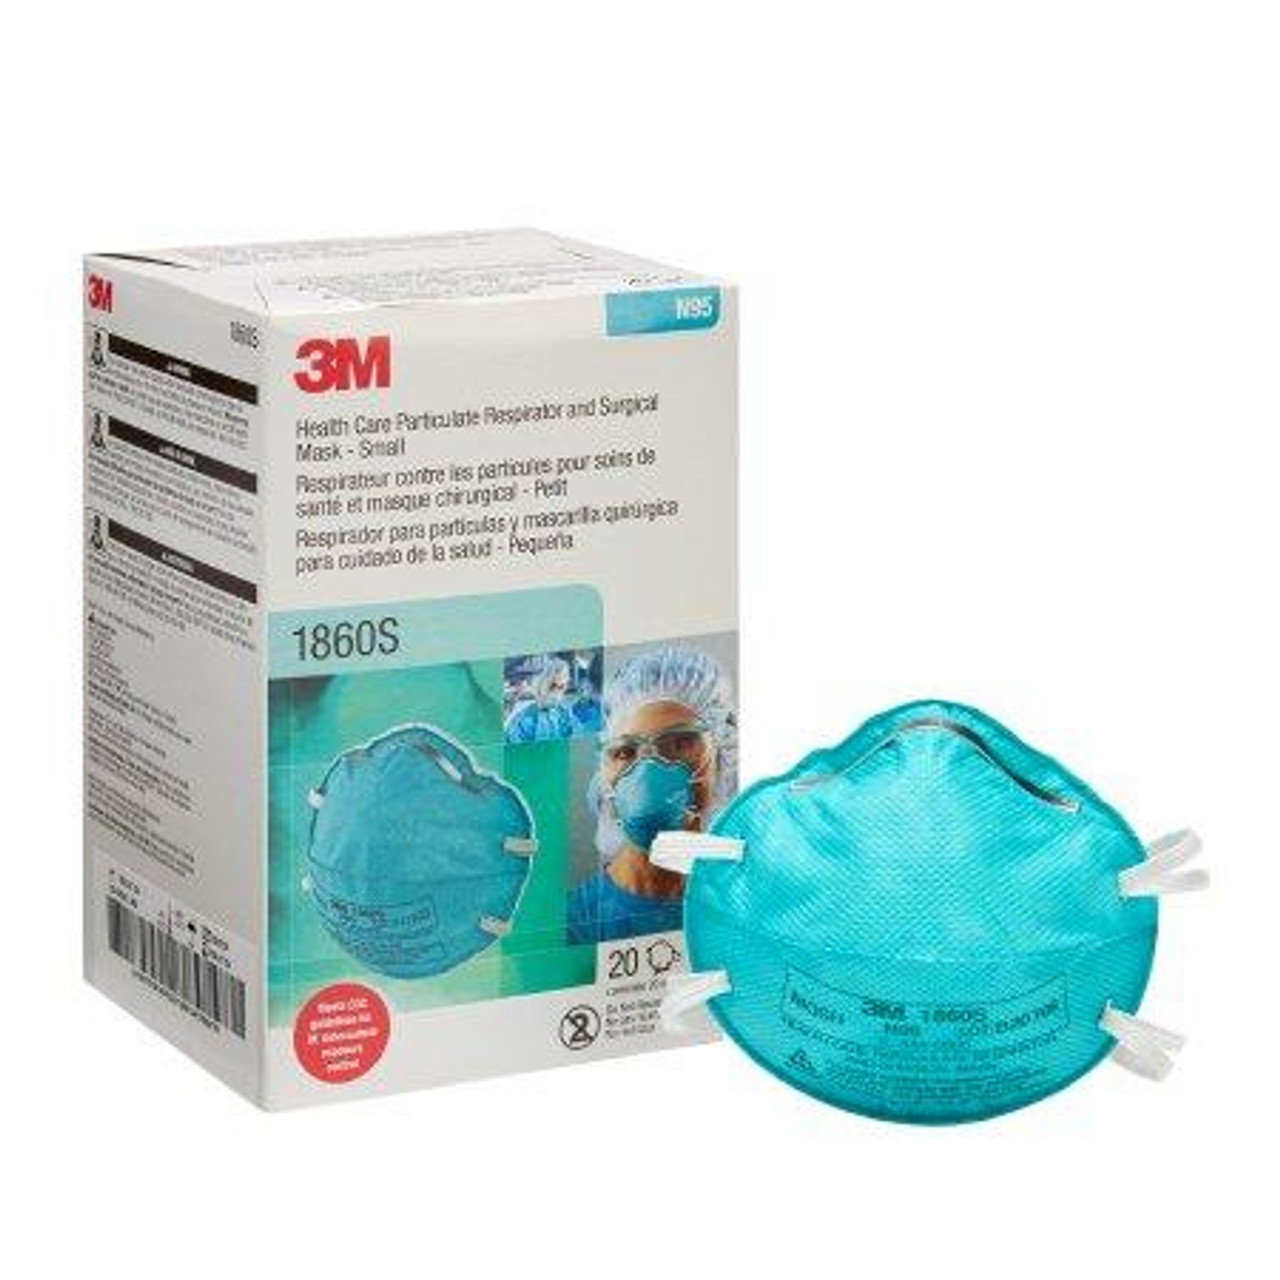 3M™ 1860S N95 Particulate Teal Respirator & Surgical Mask, Small - 20/Box 6  Box/Case